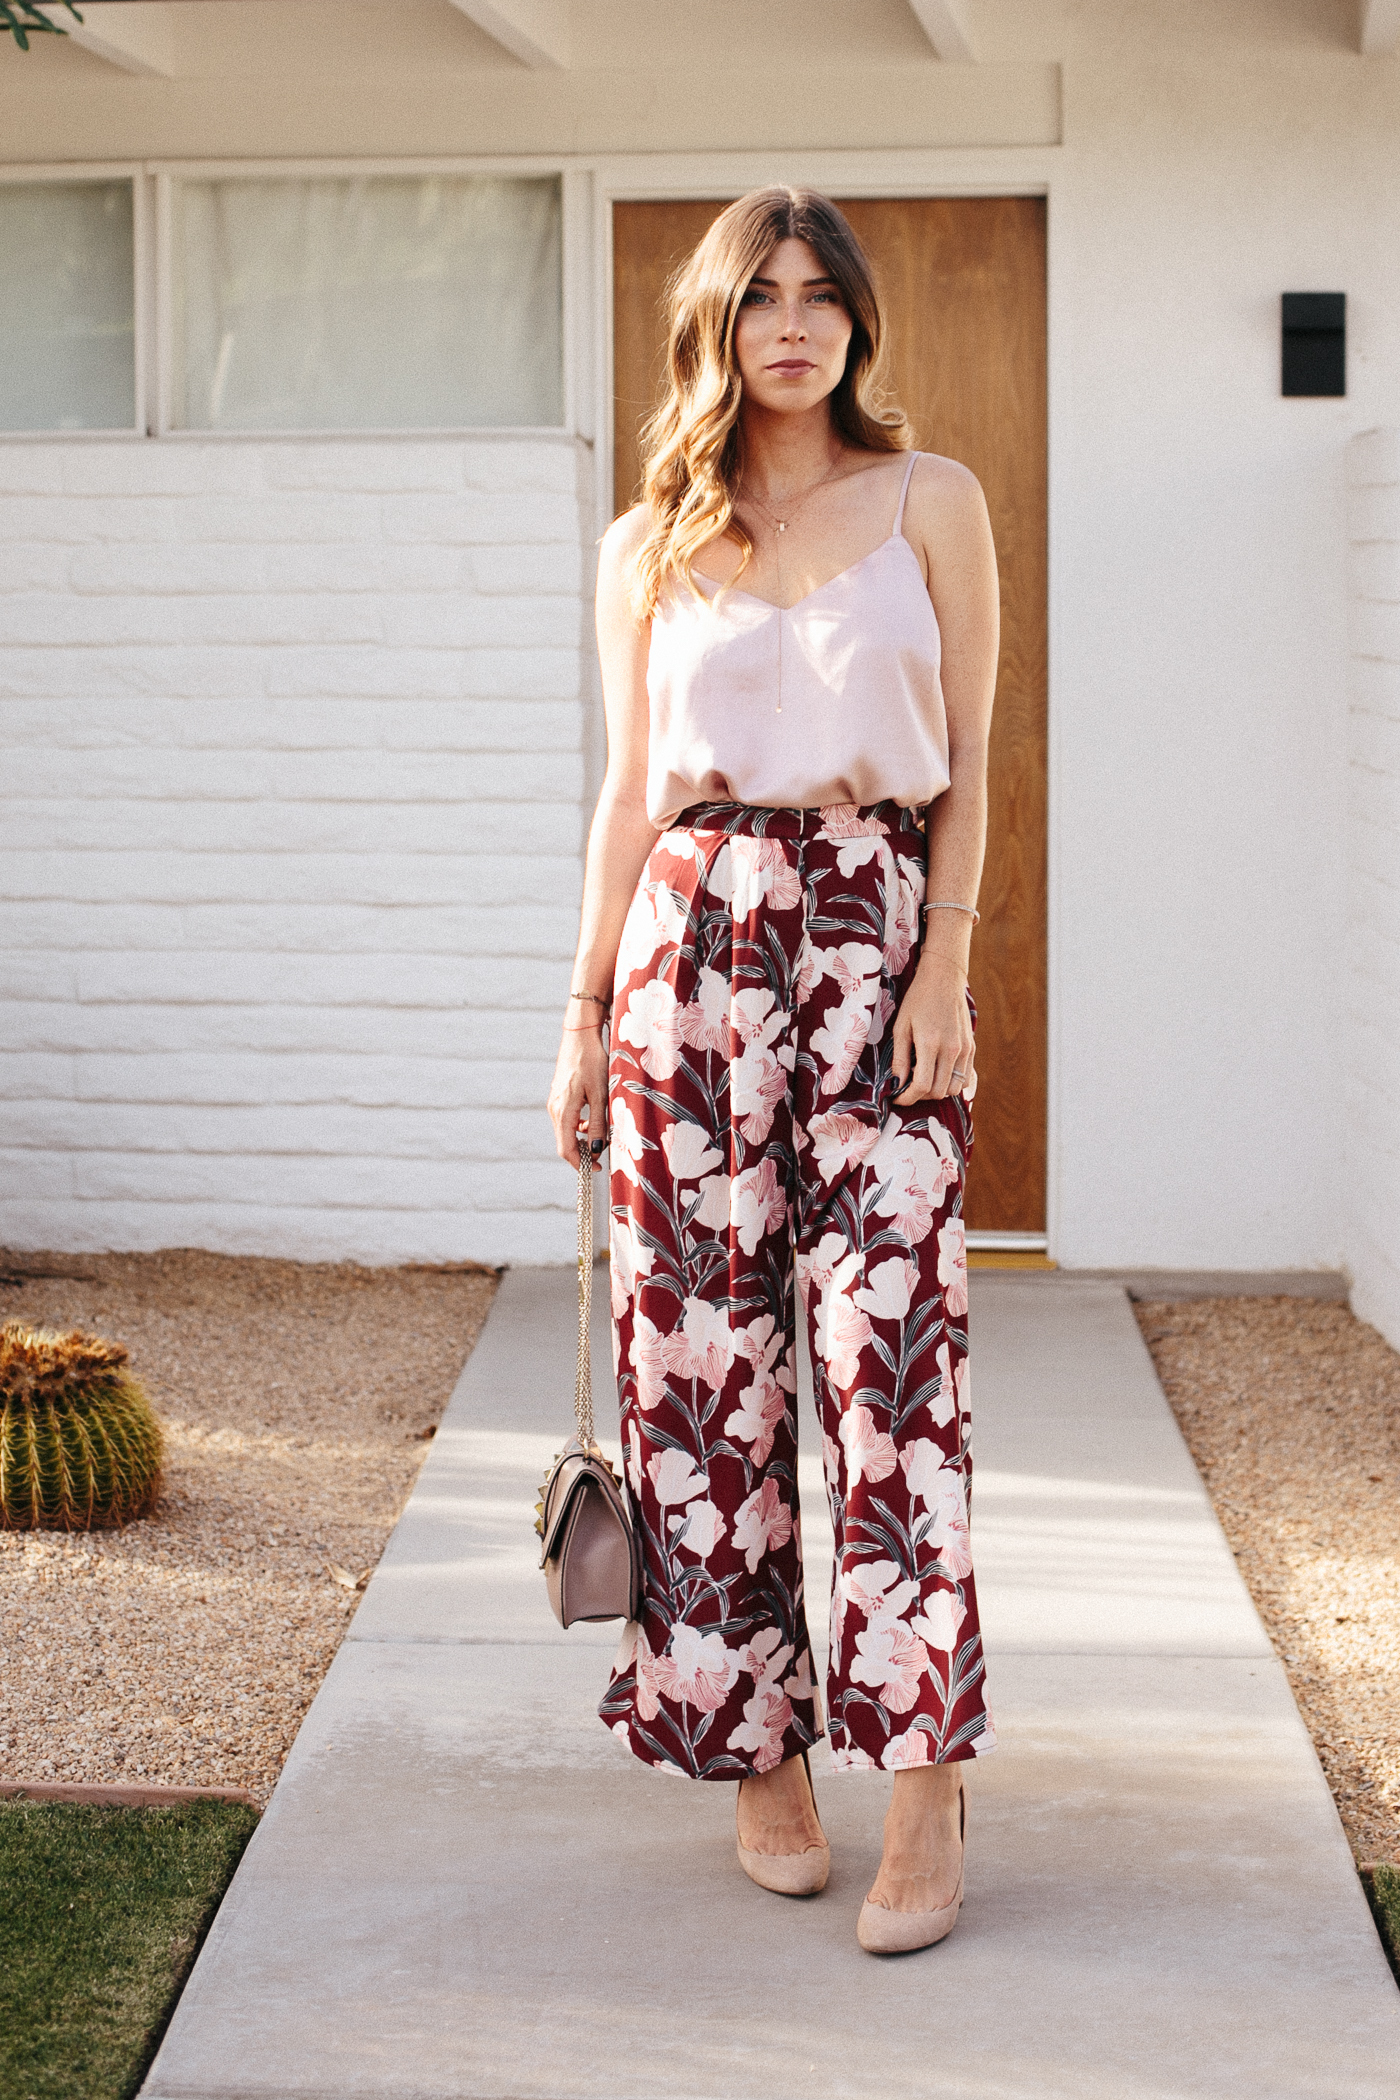 What to wear to a rehearsal dinner? Rehearsal Dinner Outfit | Bikinis & Passports